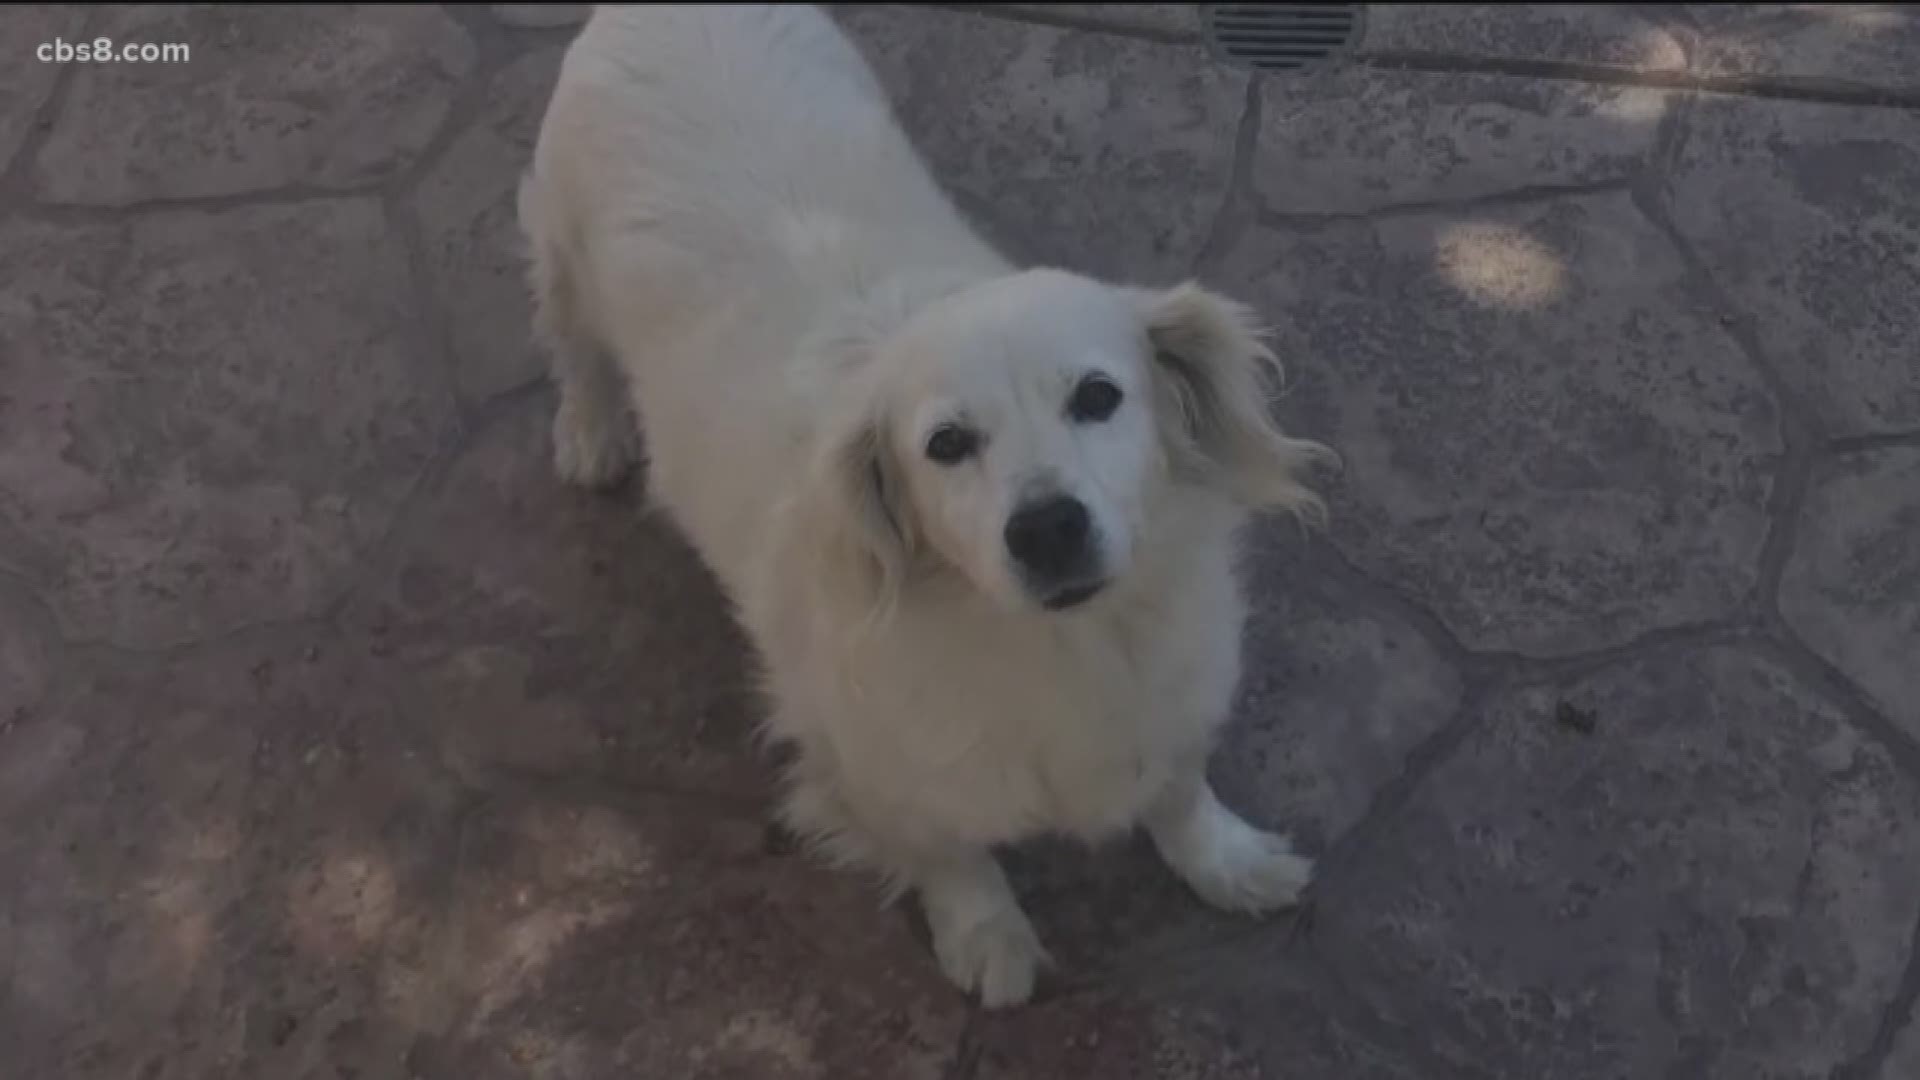 Oliver’s owner said he was too upset to go on camera but said his pup ran out the doggy door after hearing a noise and was found bloodied and motionless on the patio